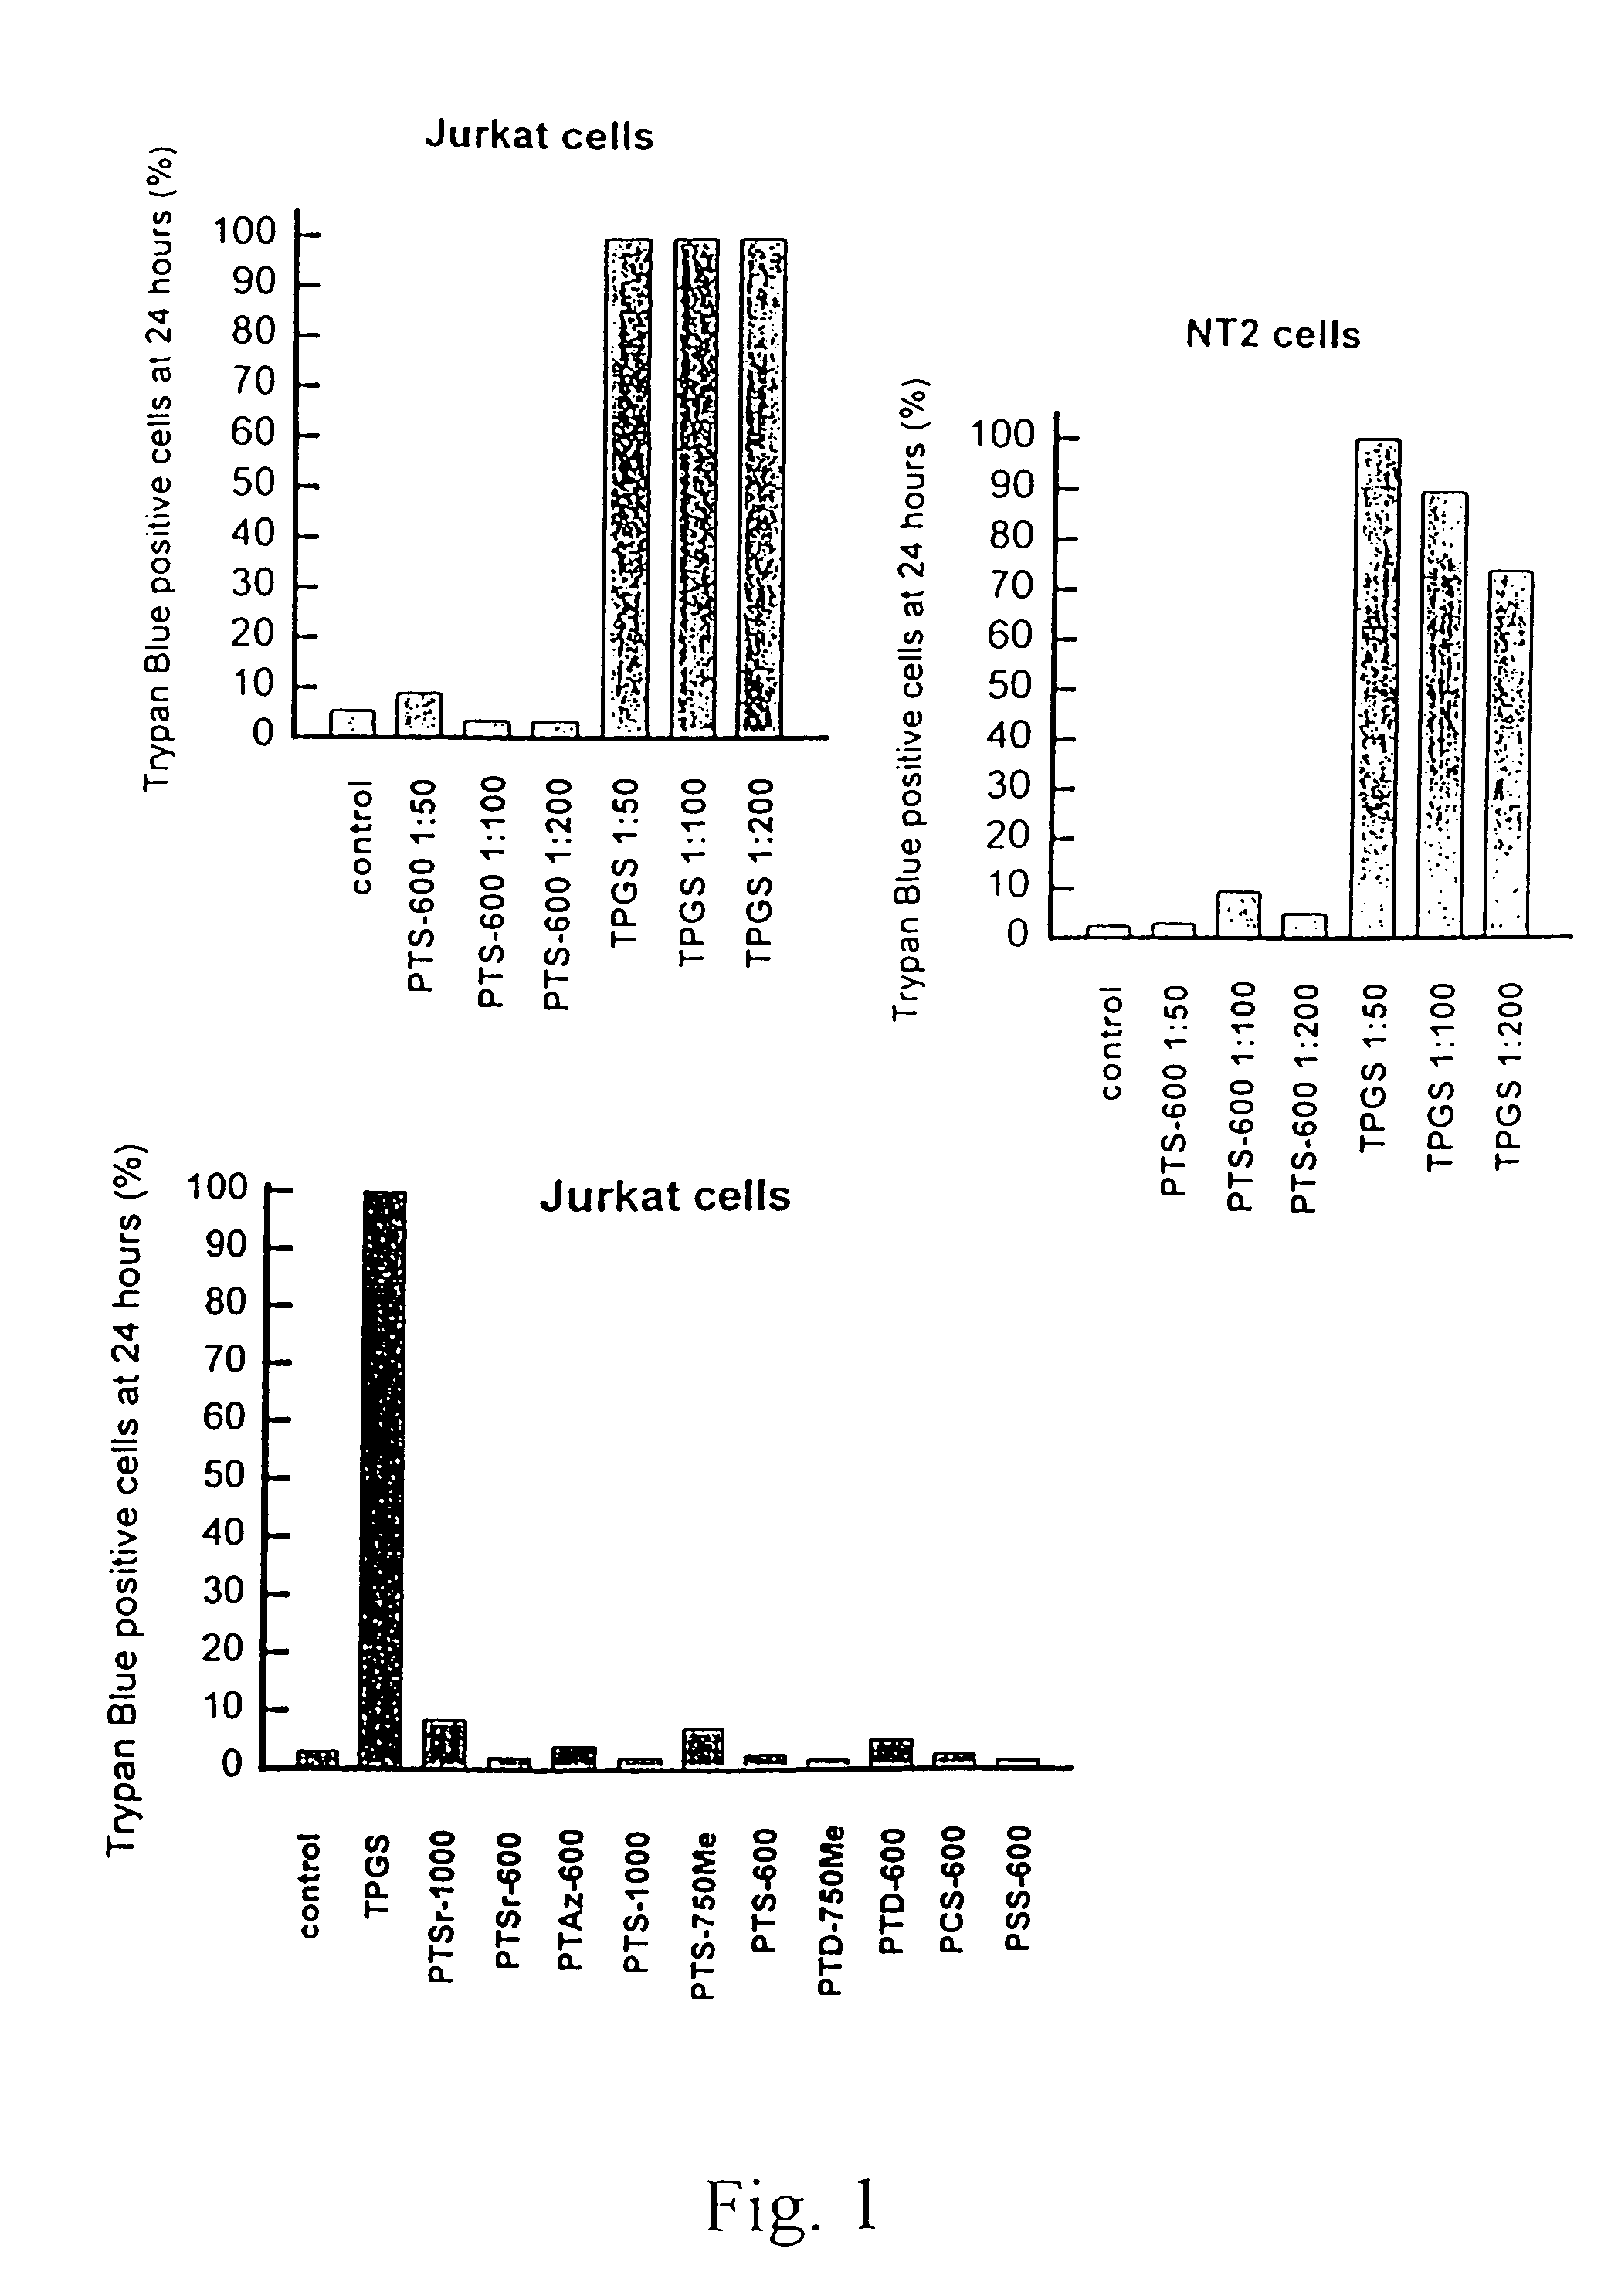 Water-soluble compositions of bioactive lipophilic compounds